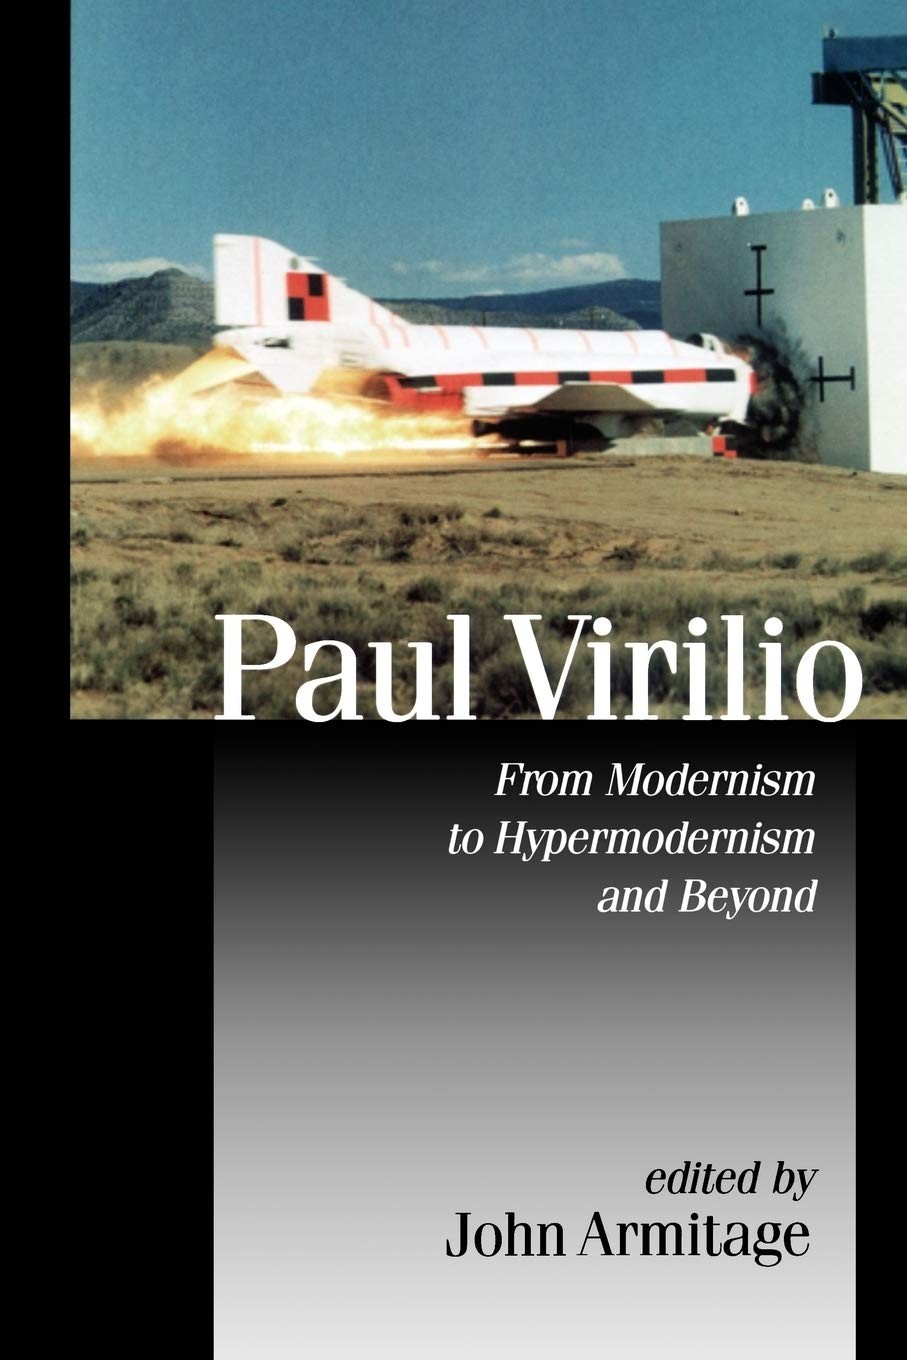 Paul Virilio: From Modernism to Hypermodernism and Beyond